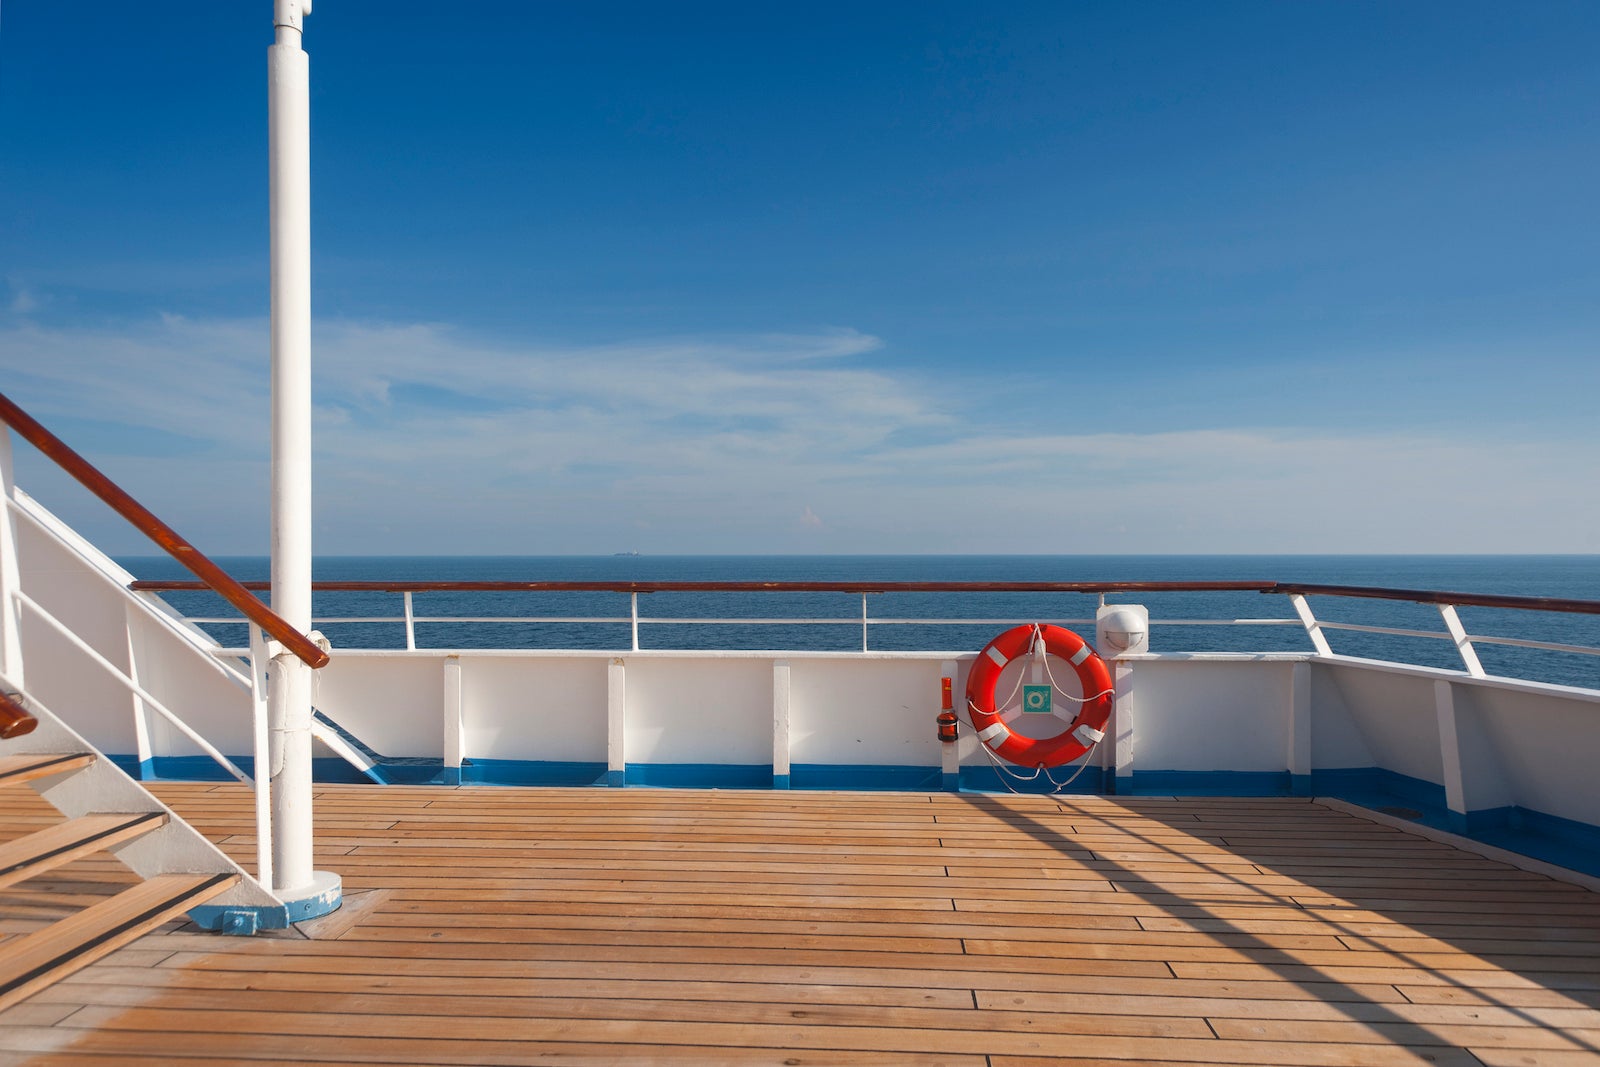 amex travel insurance for cruises